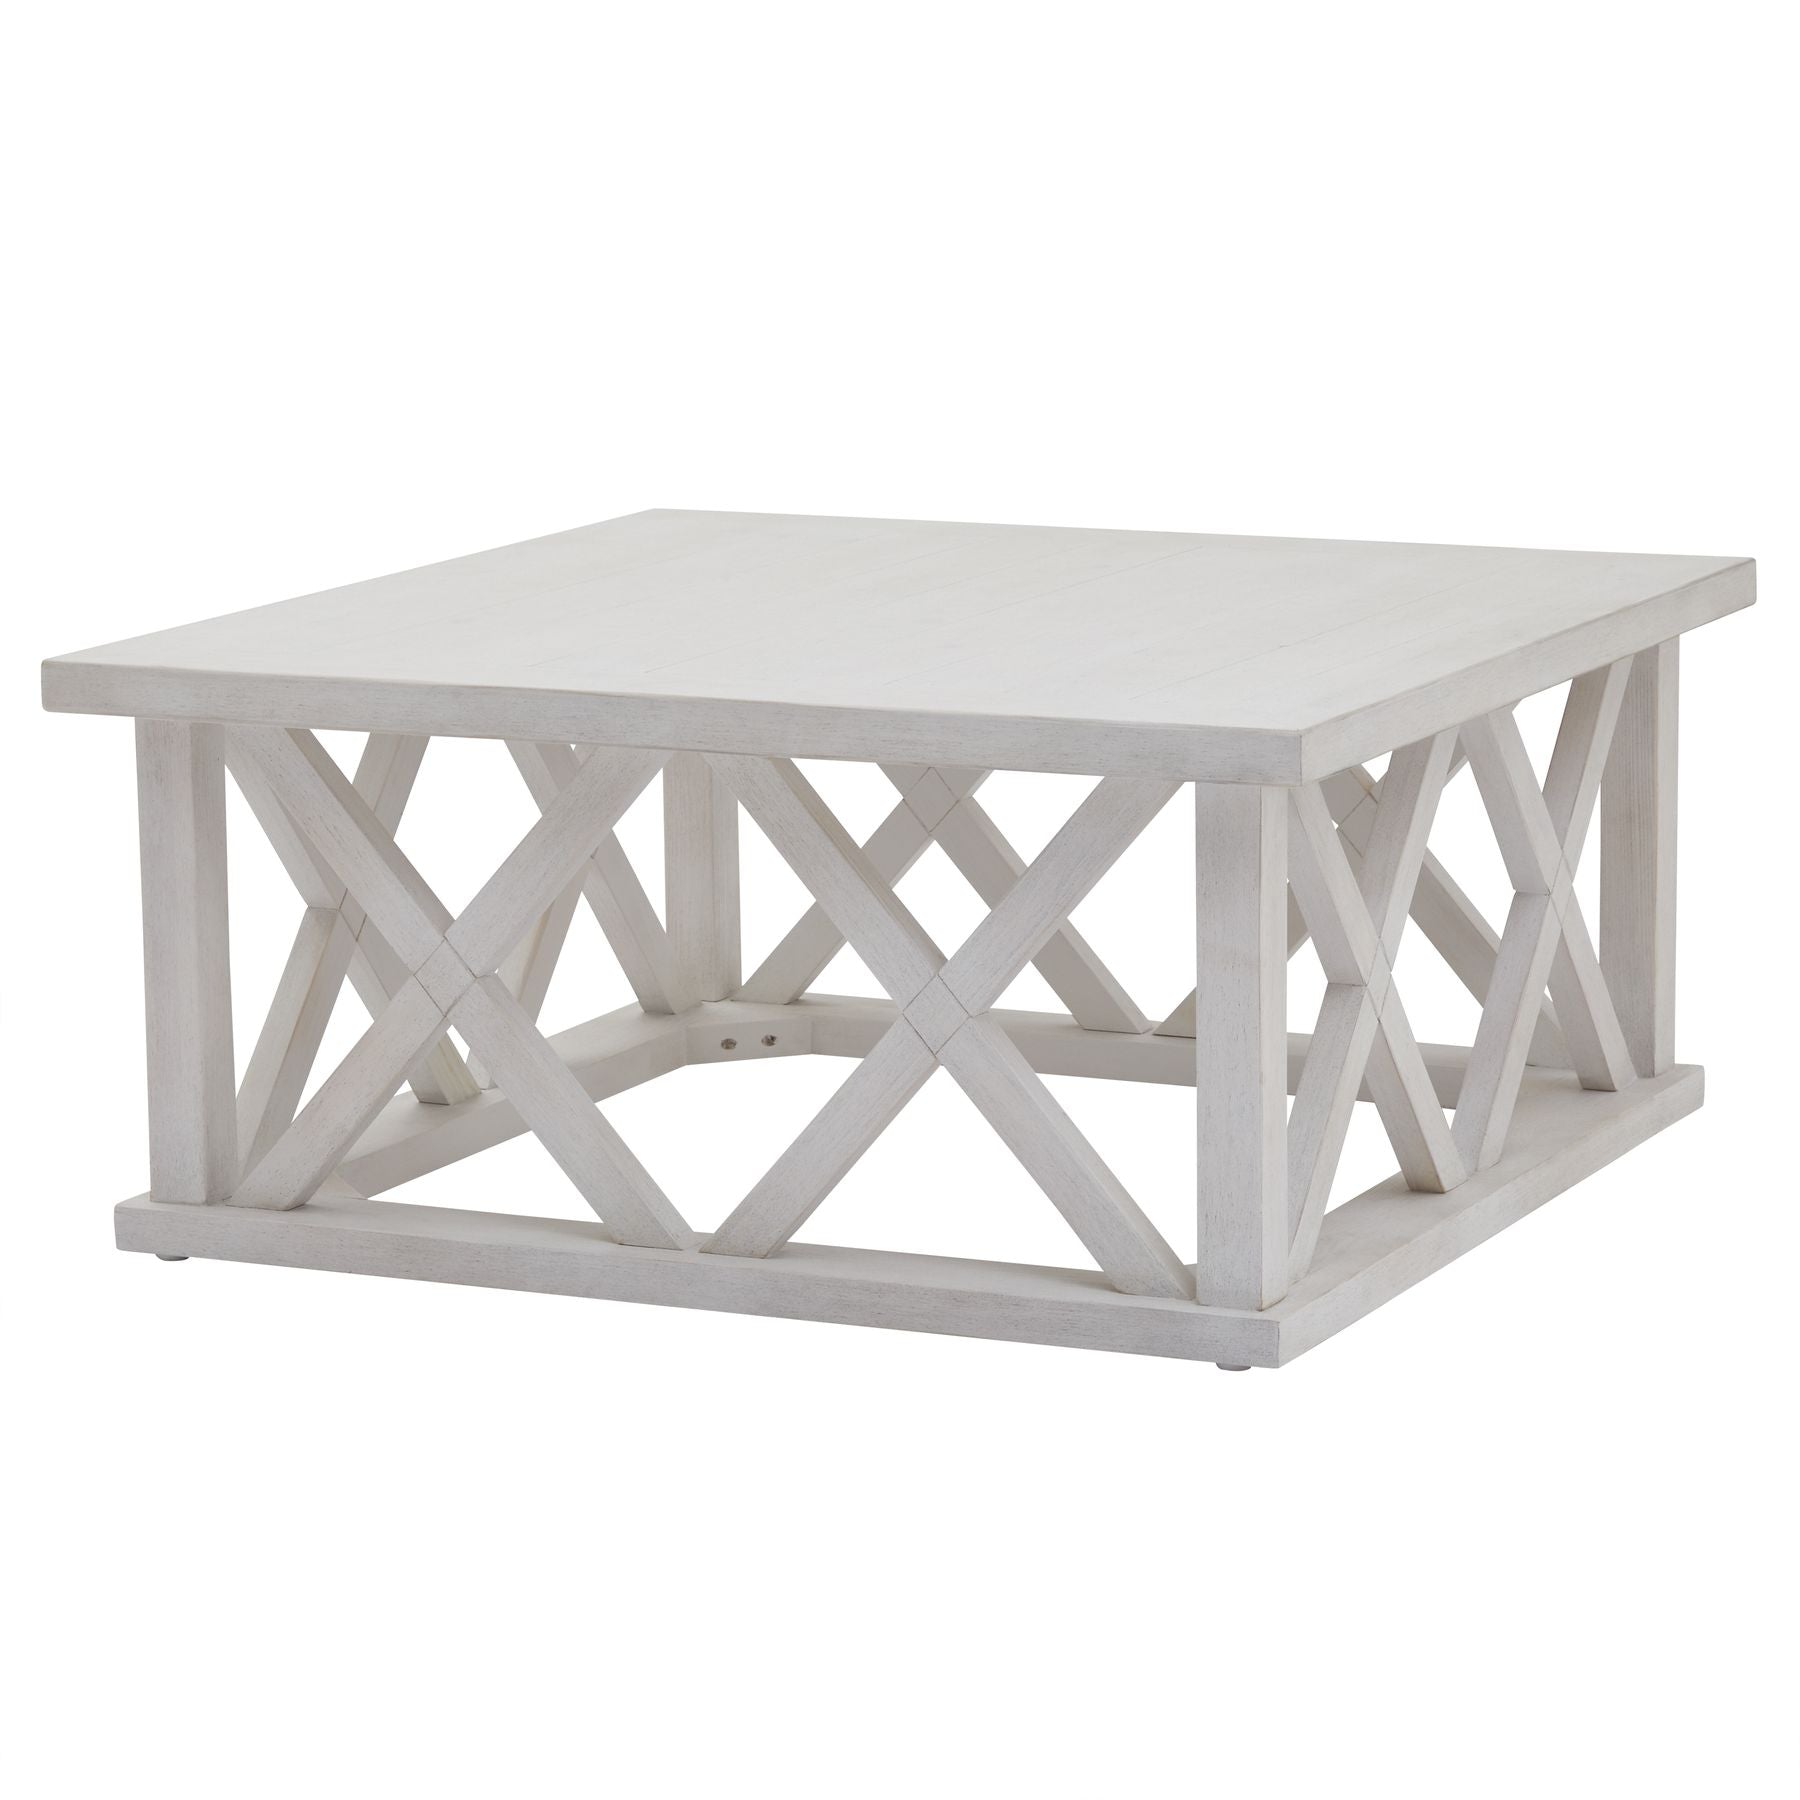 View Stamford Plank Collection Square Coffee Table information